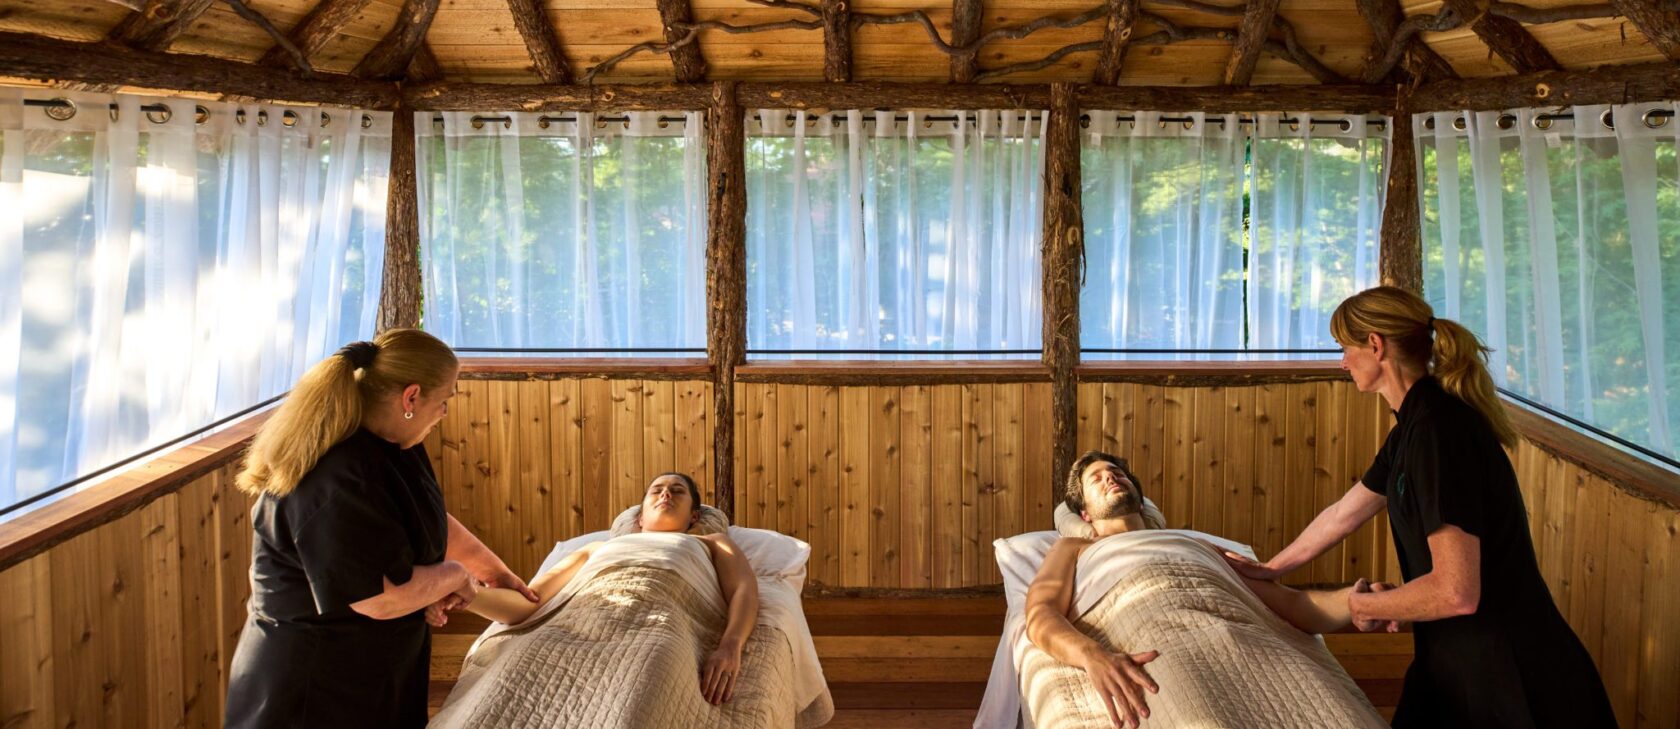 Couples Massages Offered at Mohonk